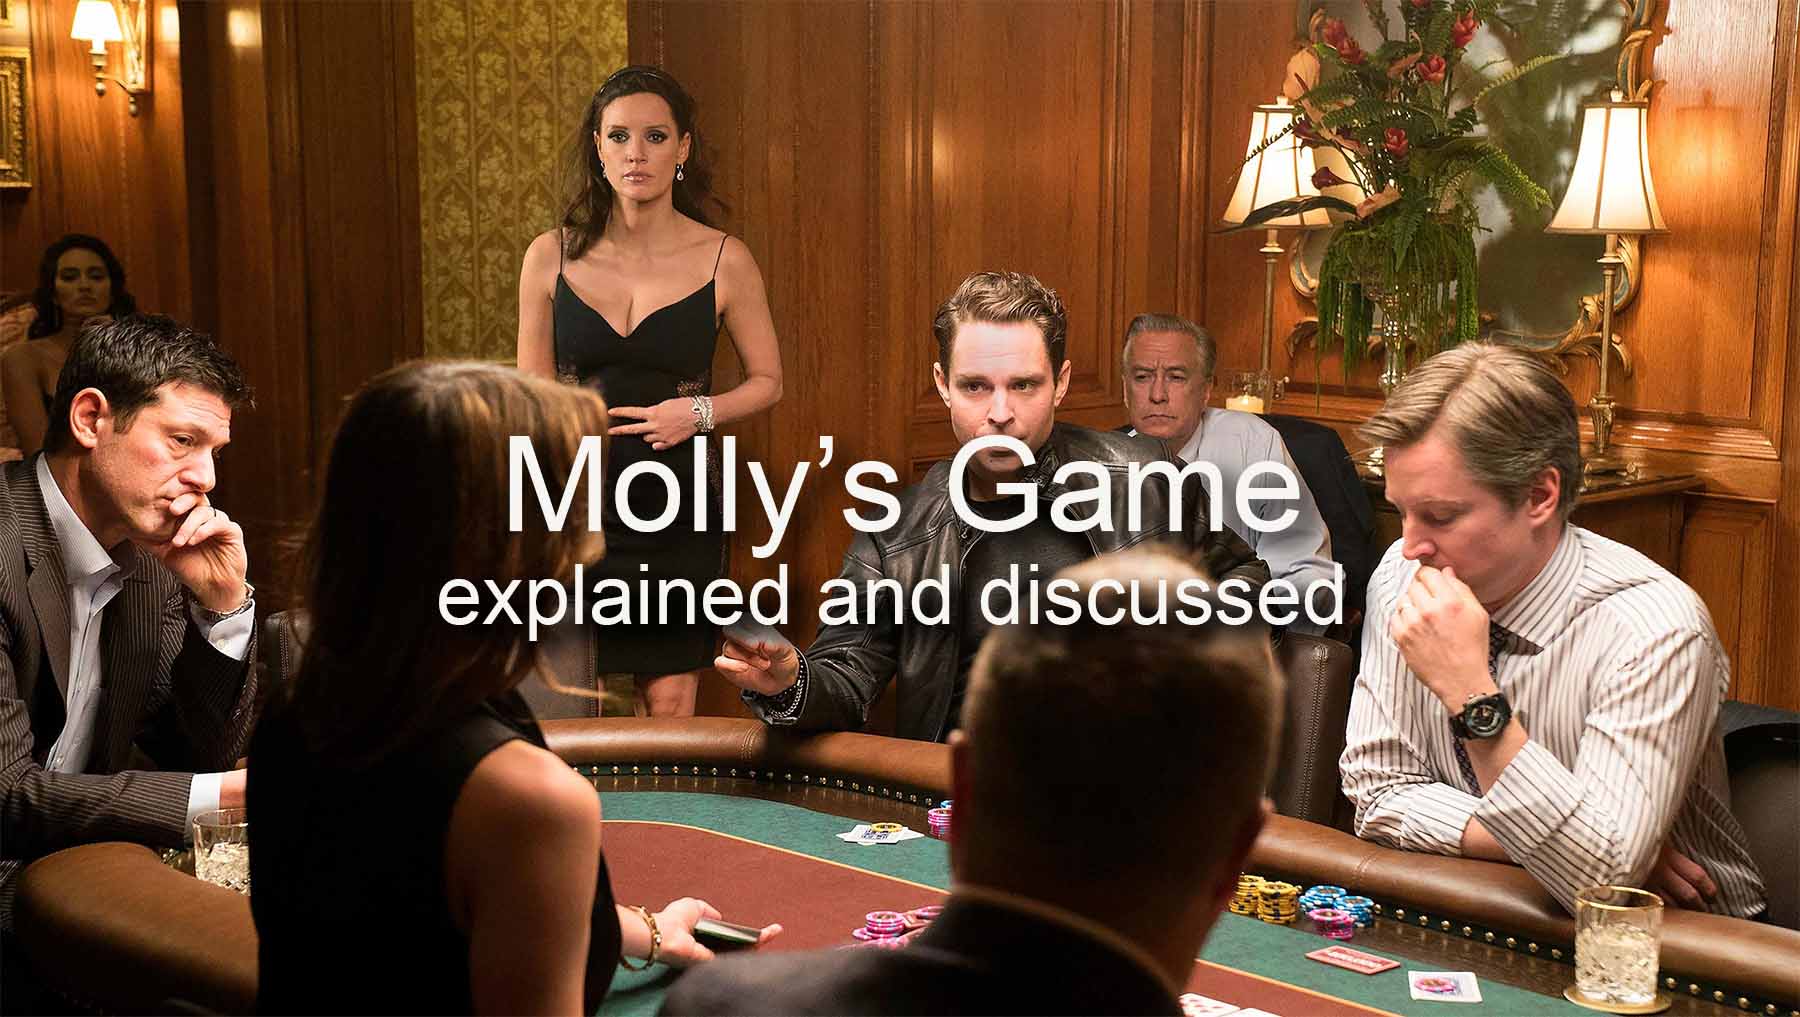 Meet the woman behind the year's hottest film Molly's Game